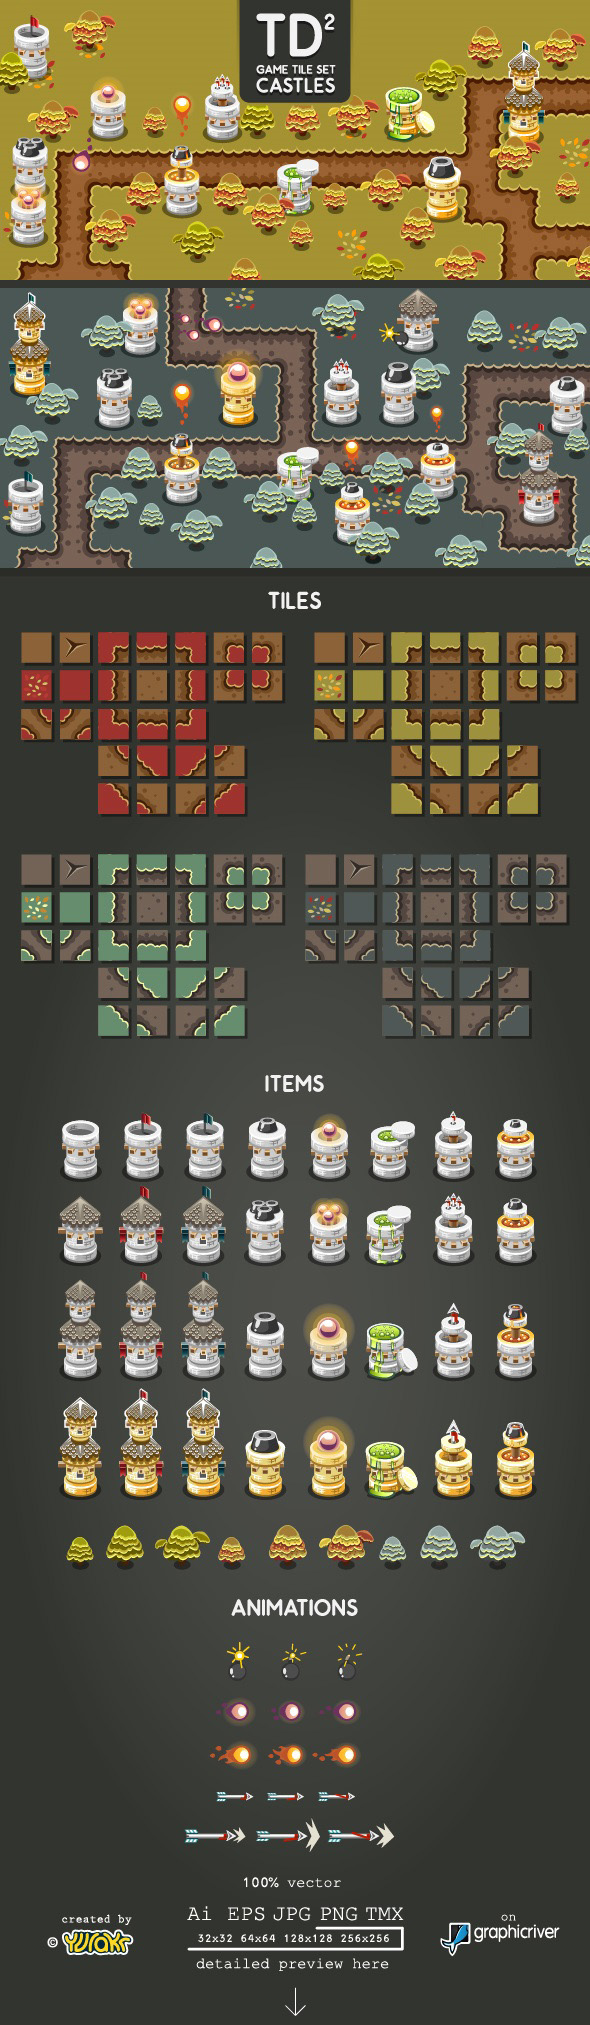 Avatars Rpg Game Assets from GraphicRiver